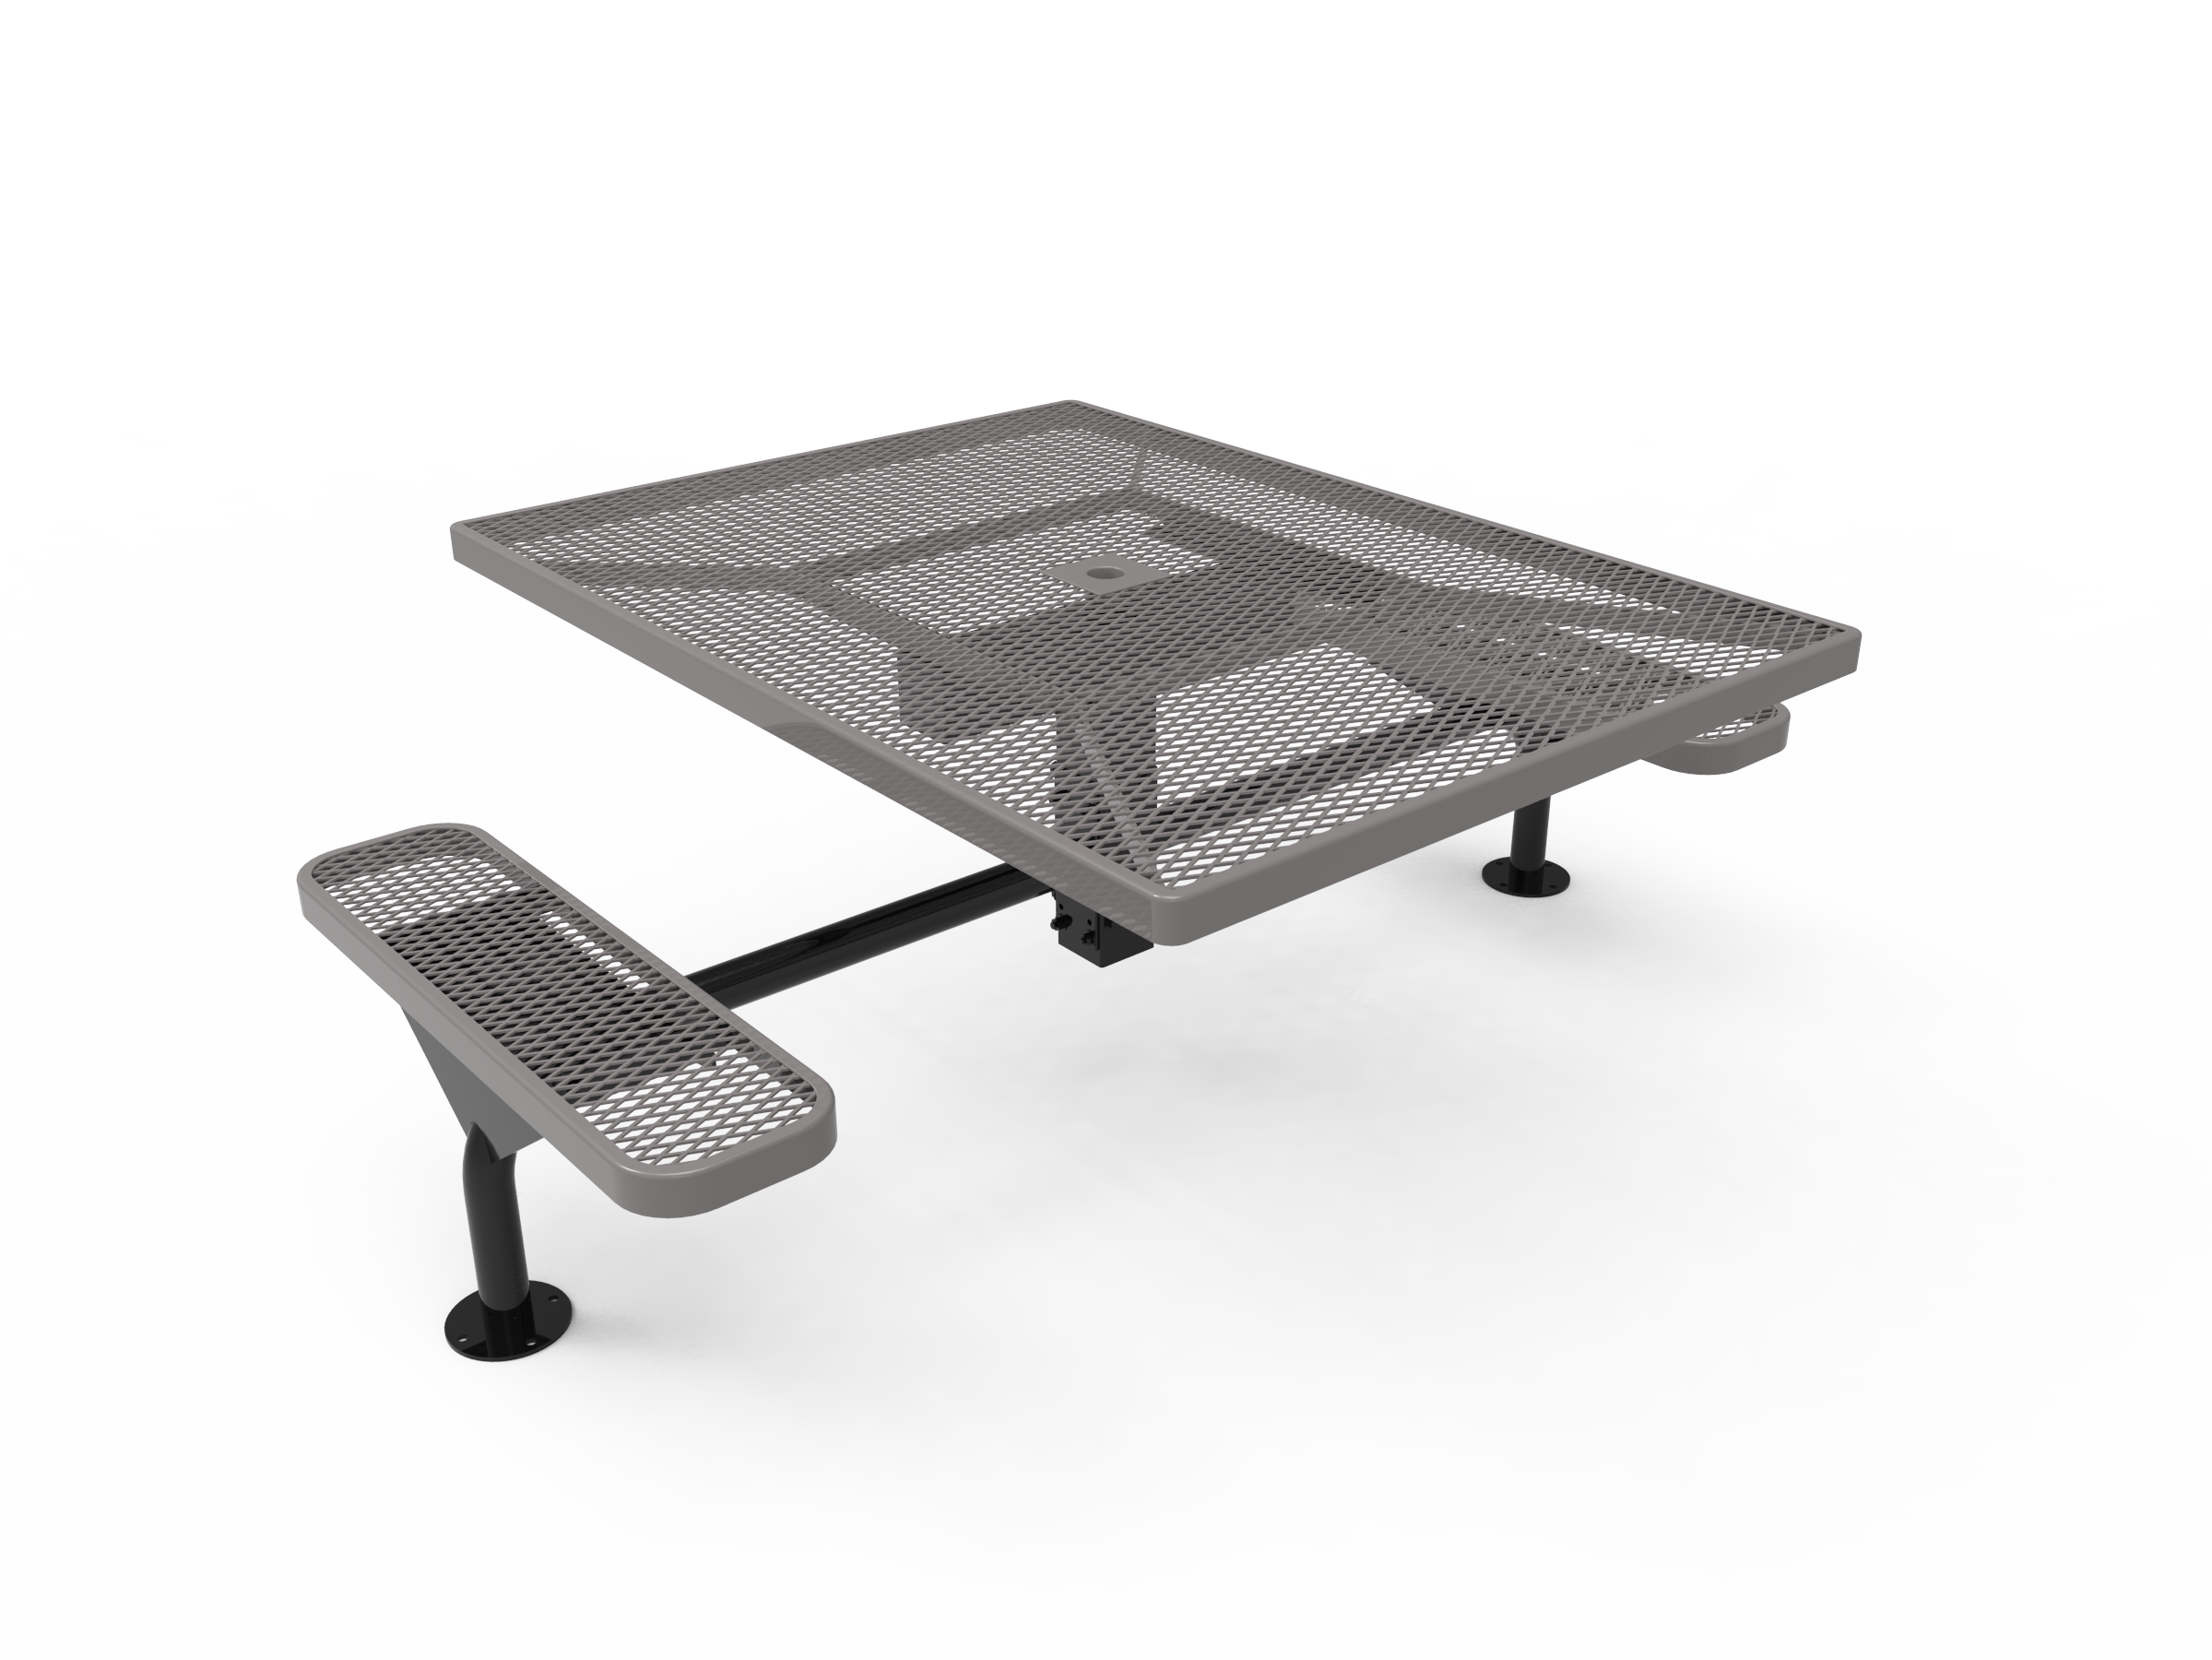 Rivendale Square Nexus Pedestal Table - ADA Accessible, Frame with Powder Coat Finish, Top and Seats with Standard Thermoplastic Coating